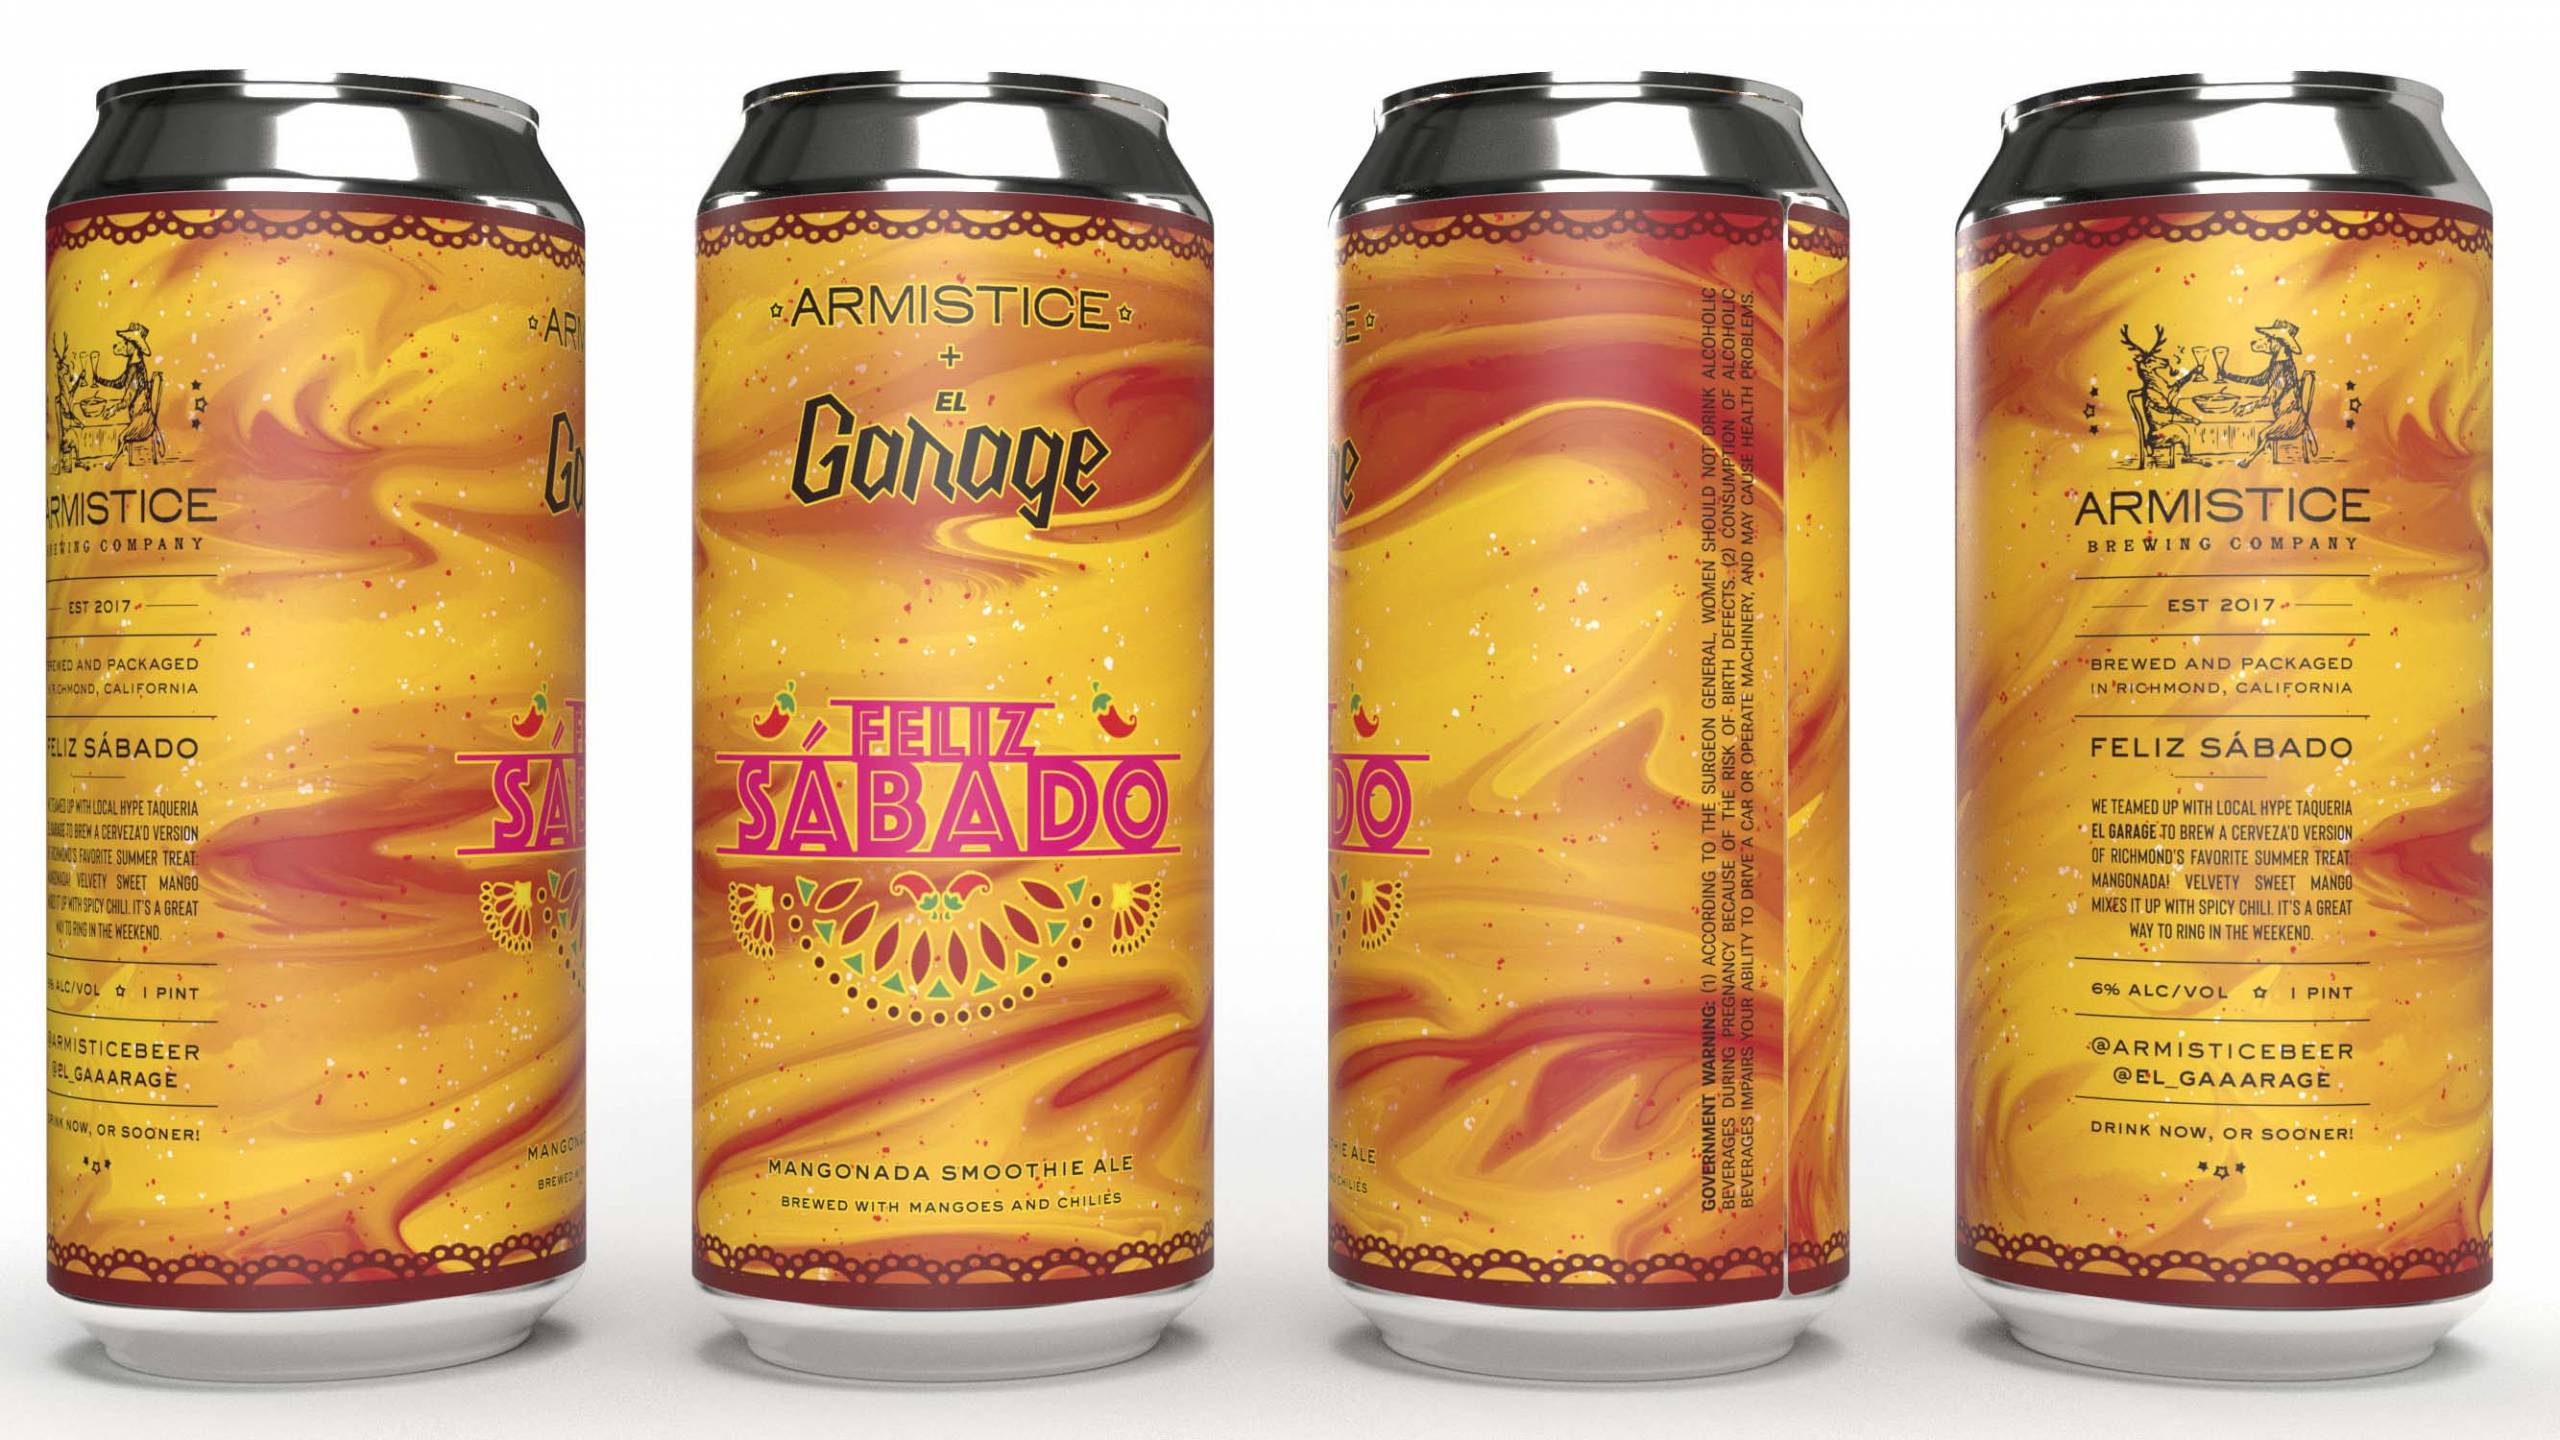 Four cans of beer with an orange and red label; the text on the can reads "Feliz Sabado" and "Armistice + El Garage"